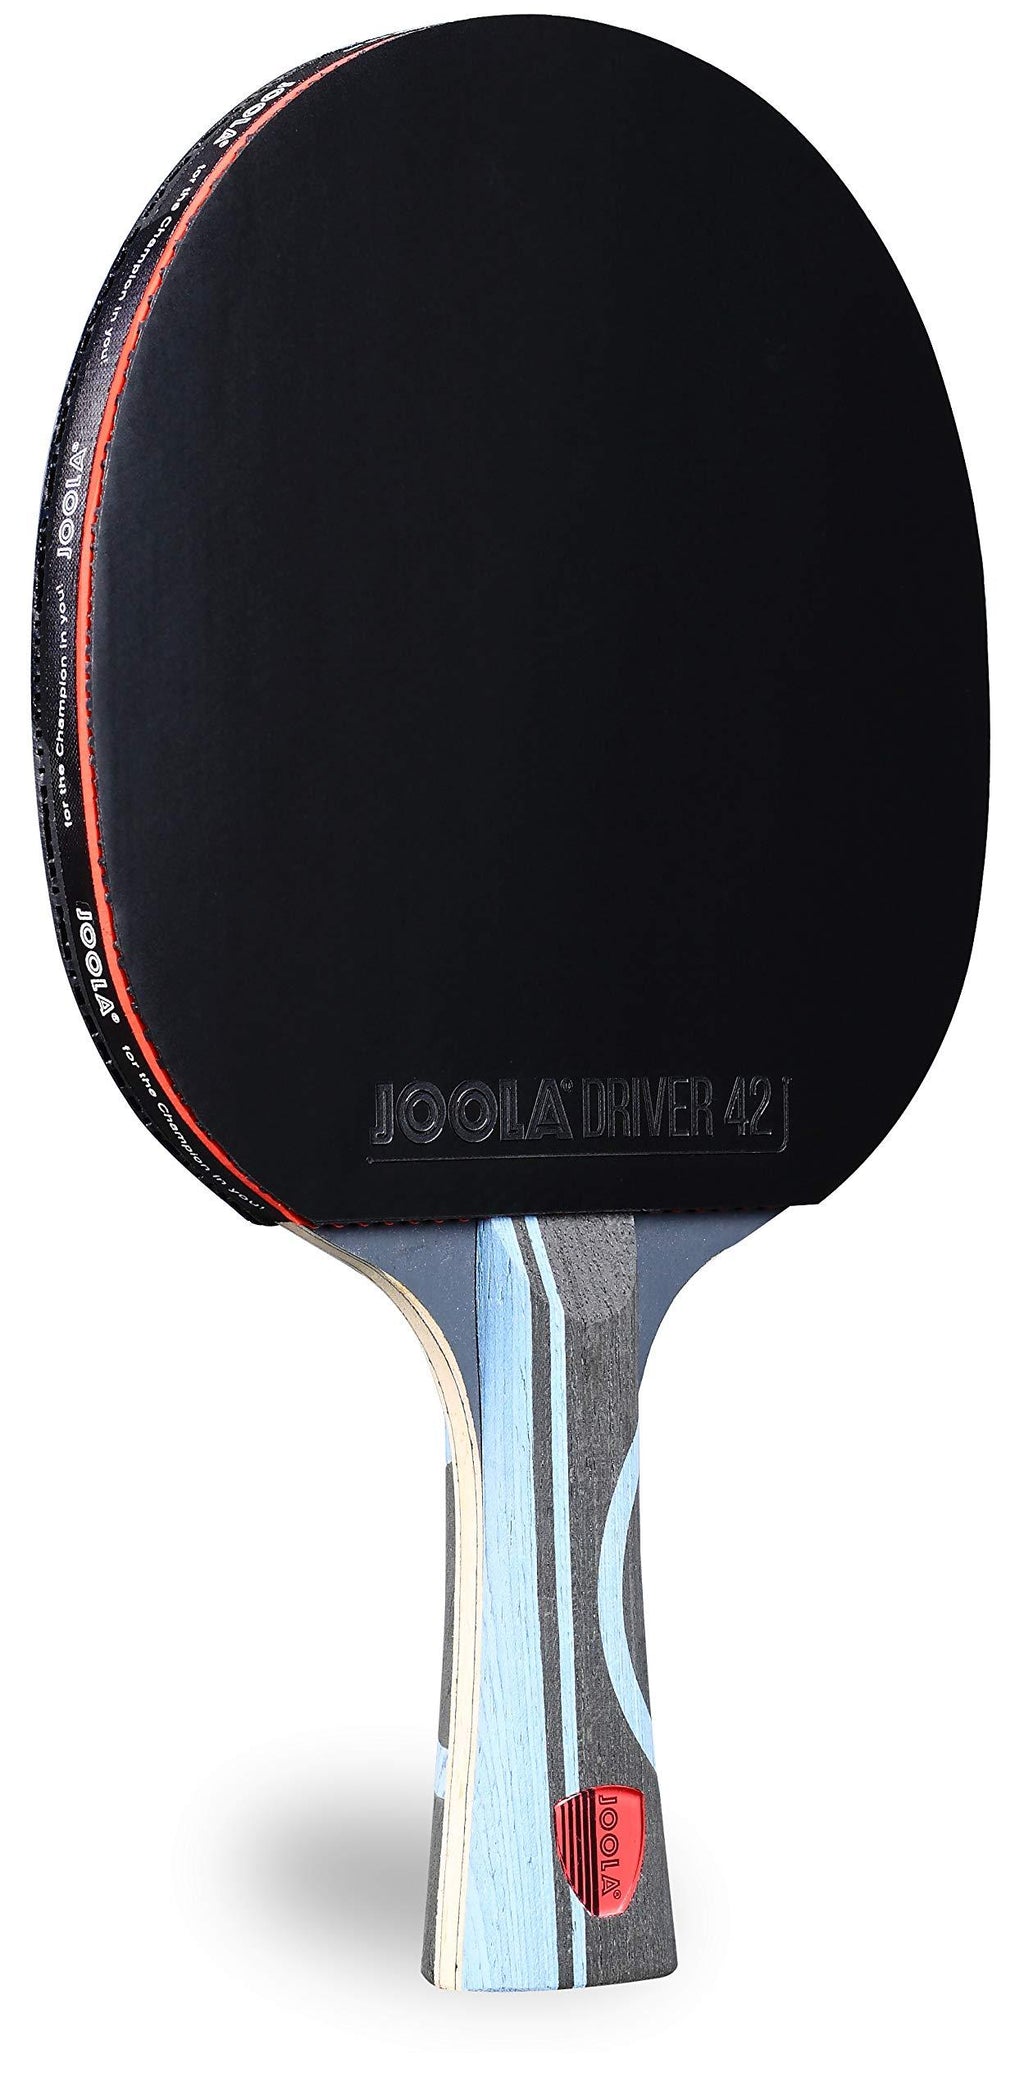 JOOLA Infinity Edge - Tournament Performance Ping Pong Paddle w/ Pro Carbon Technology - Black Rubber on Both Sides - Competition Ready - Table Tennis Racket for Advanced Training - Designed for Speed Light Blue - BeesActive Australia